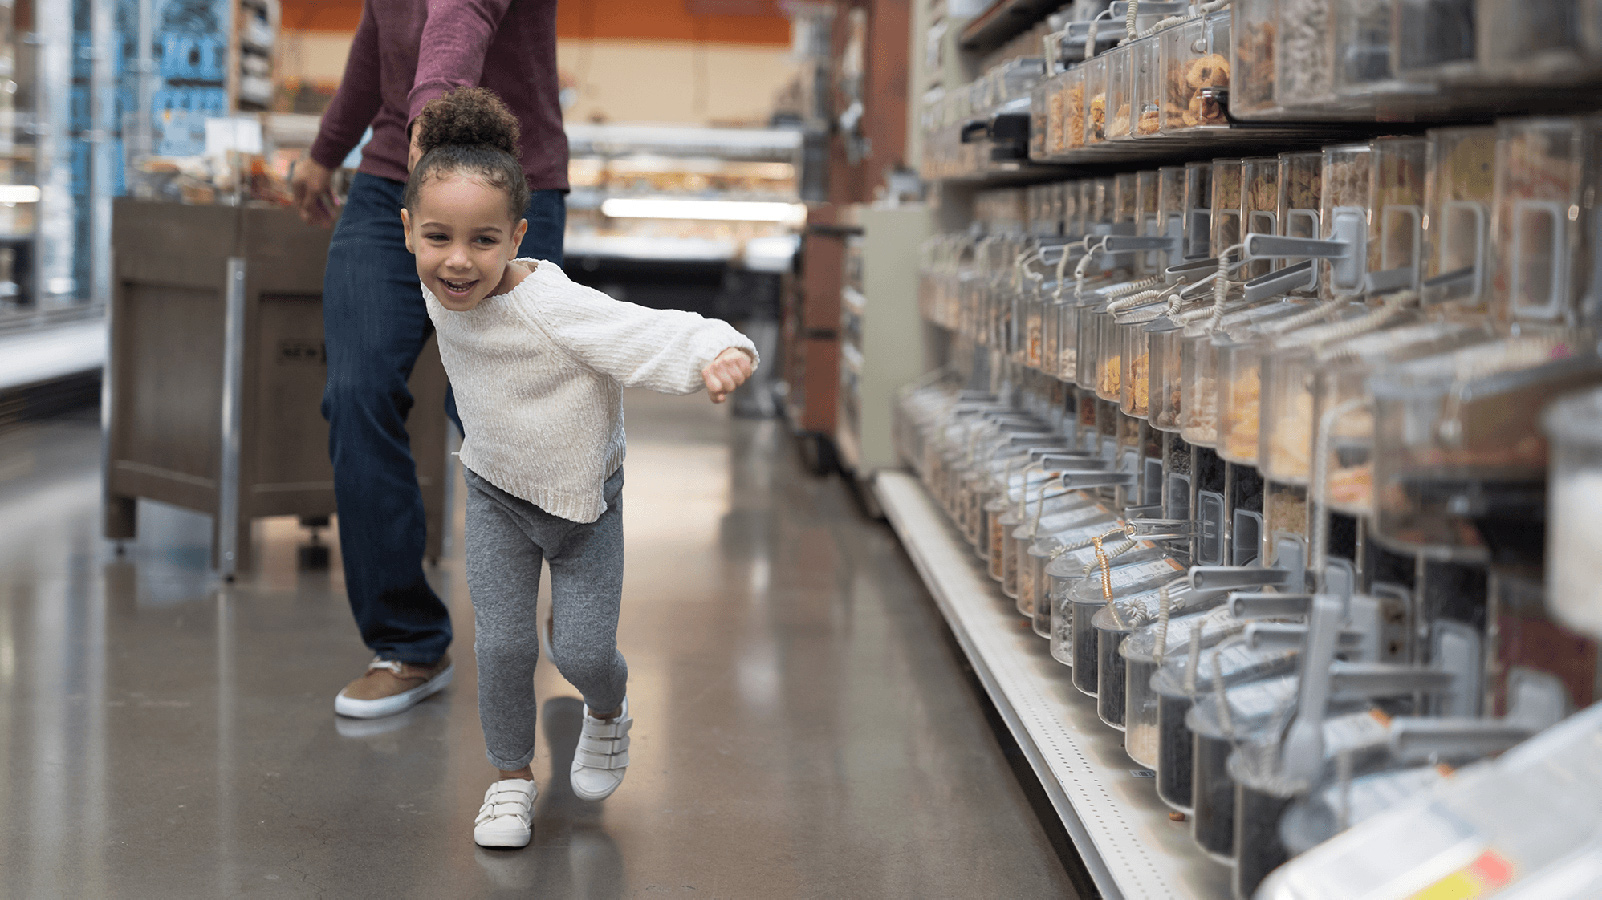 Little girl pulling her dad through a grocery store.